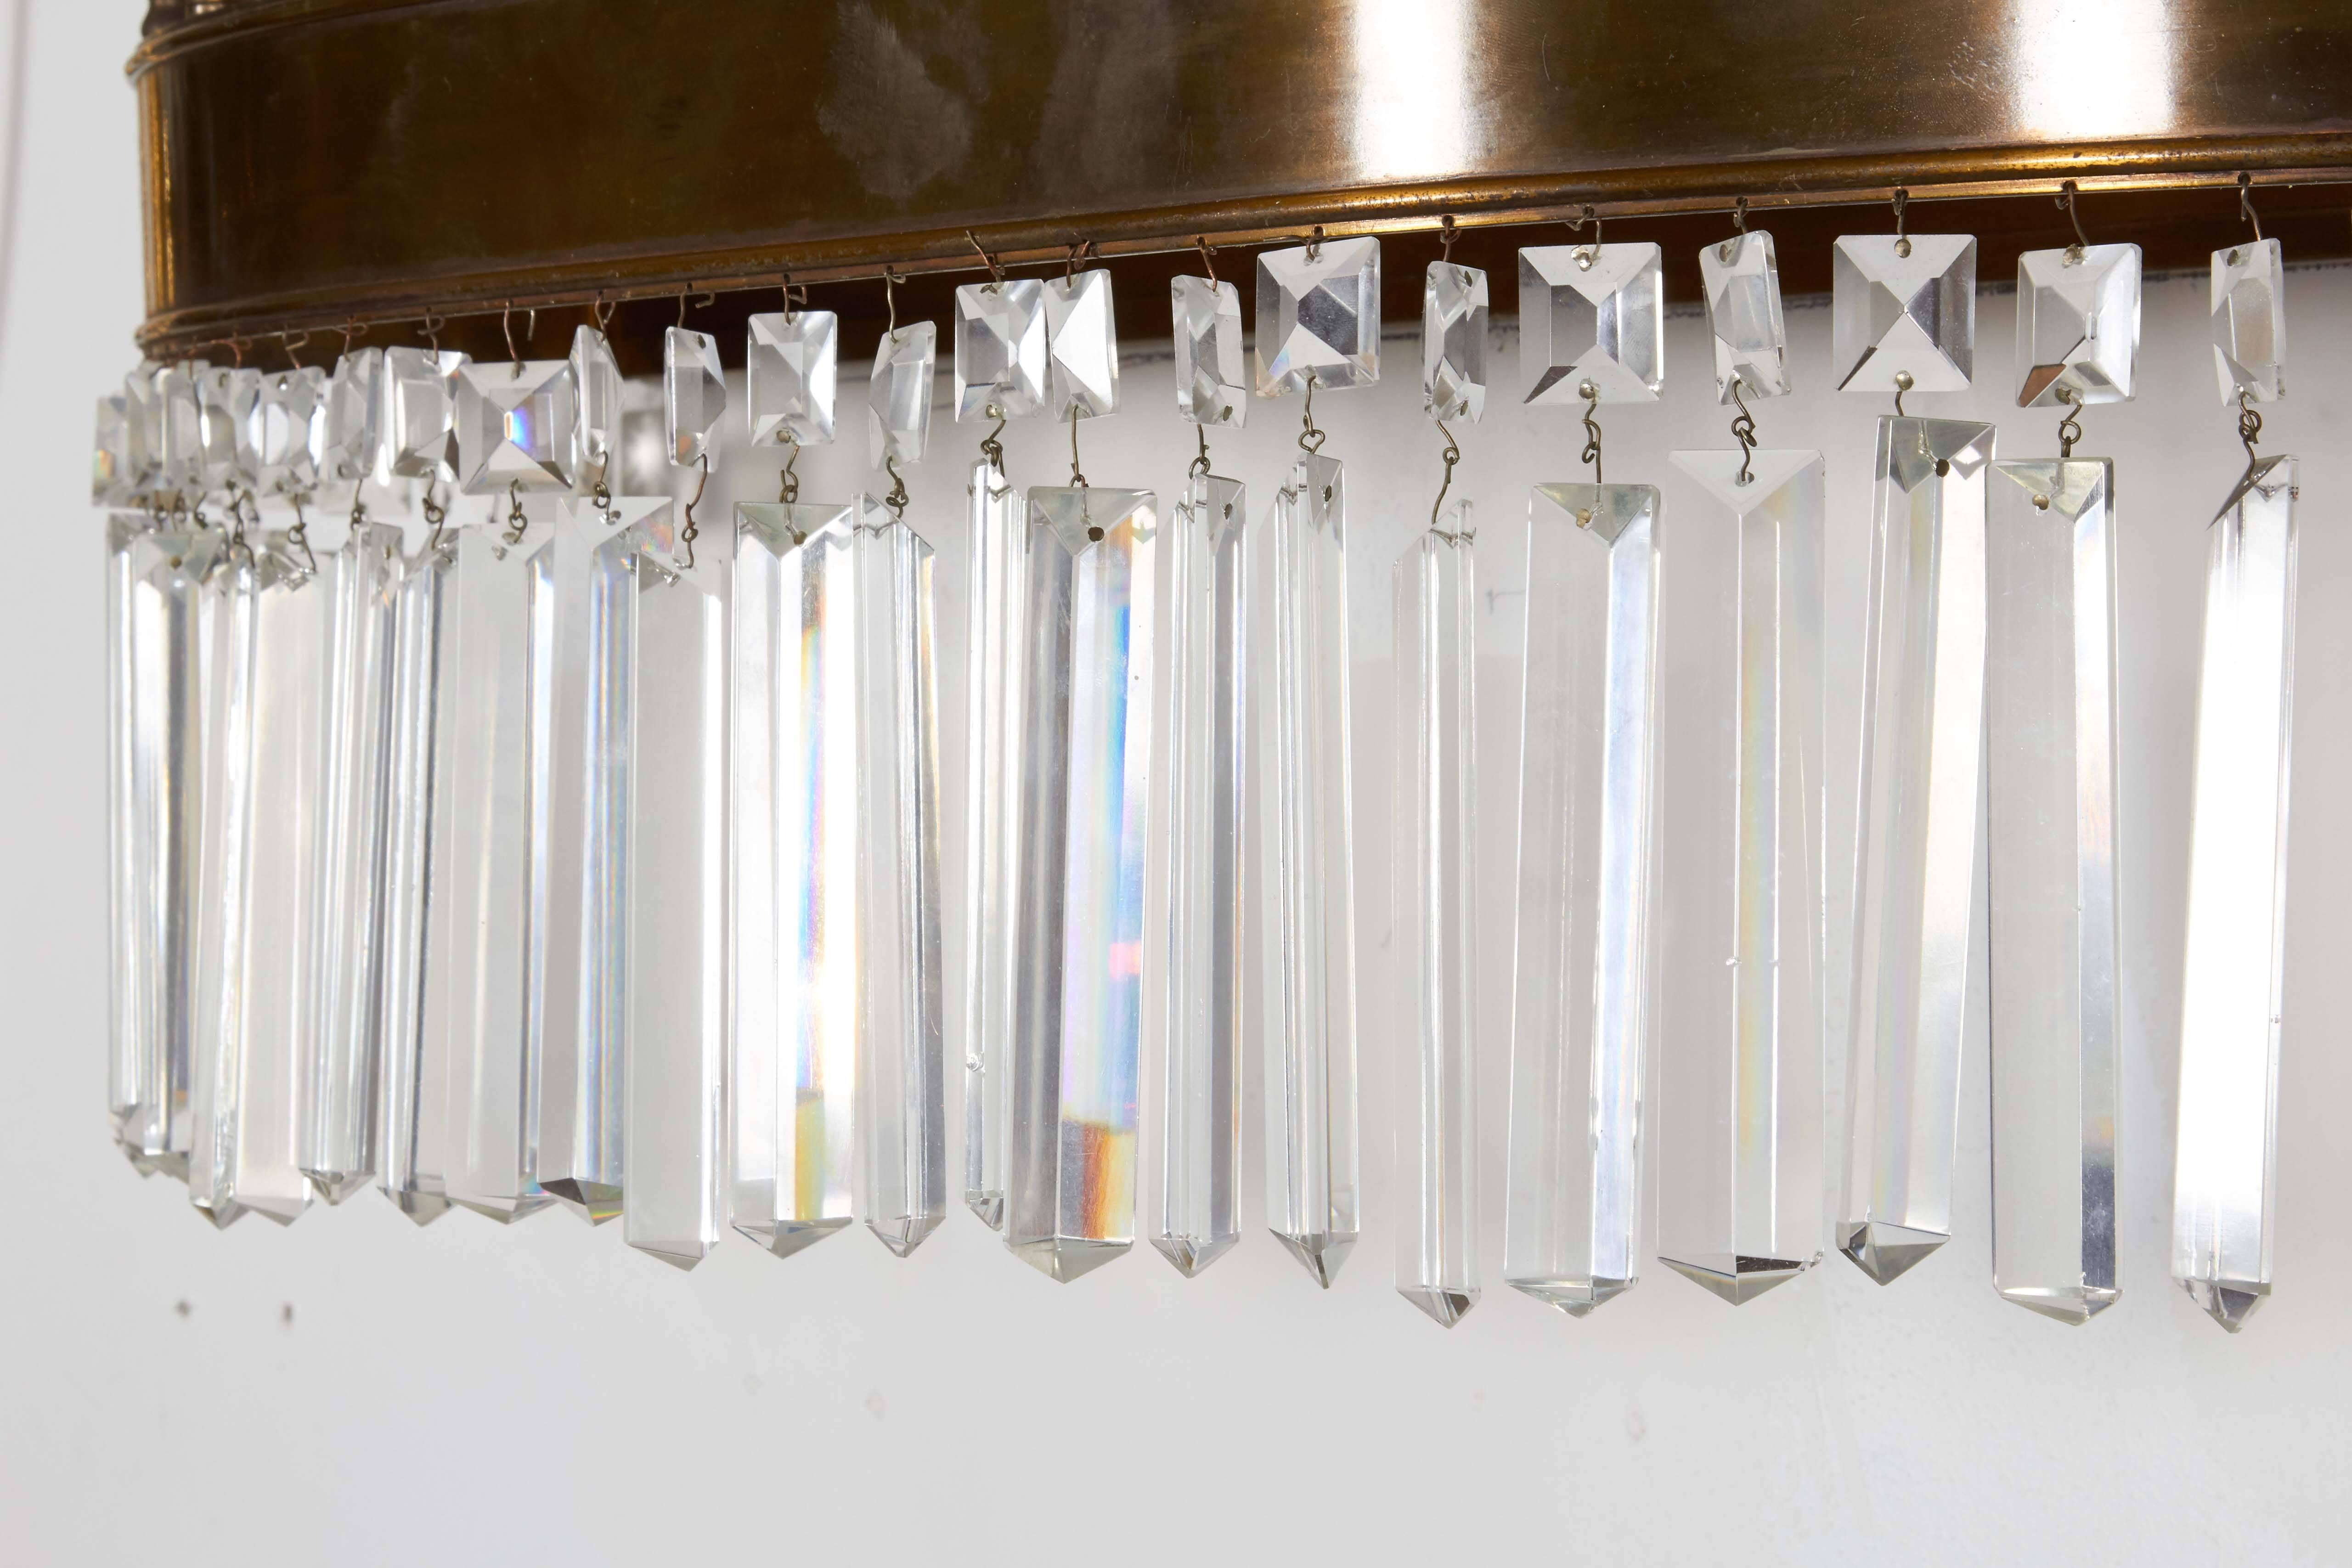 A large vintage wall light, including five lights, each with rounded glass shade, mounted on a brass demilune frame, trimmed with crystal prisms and pointed finials. Despite minuscule presence of chips to original crystals, this fixture remains in